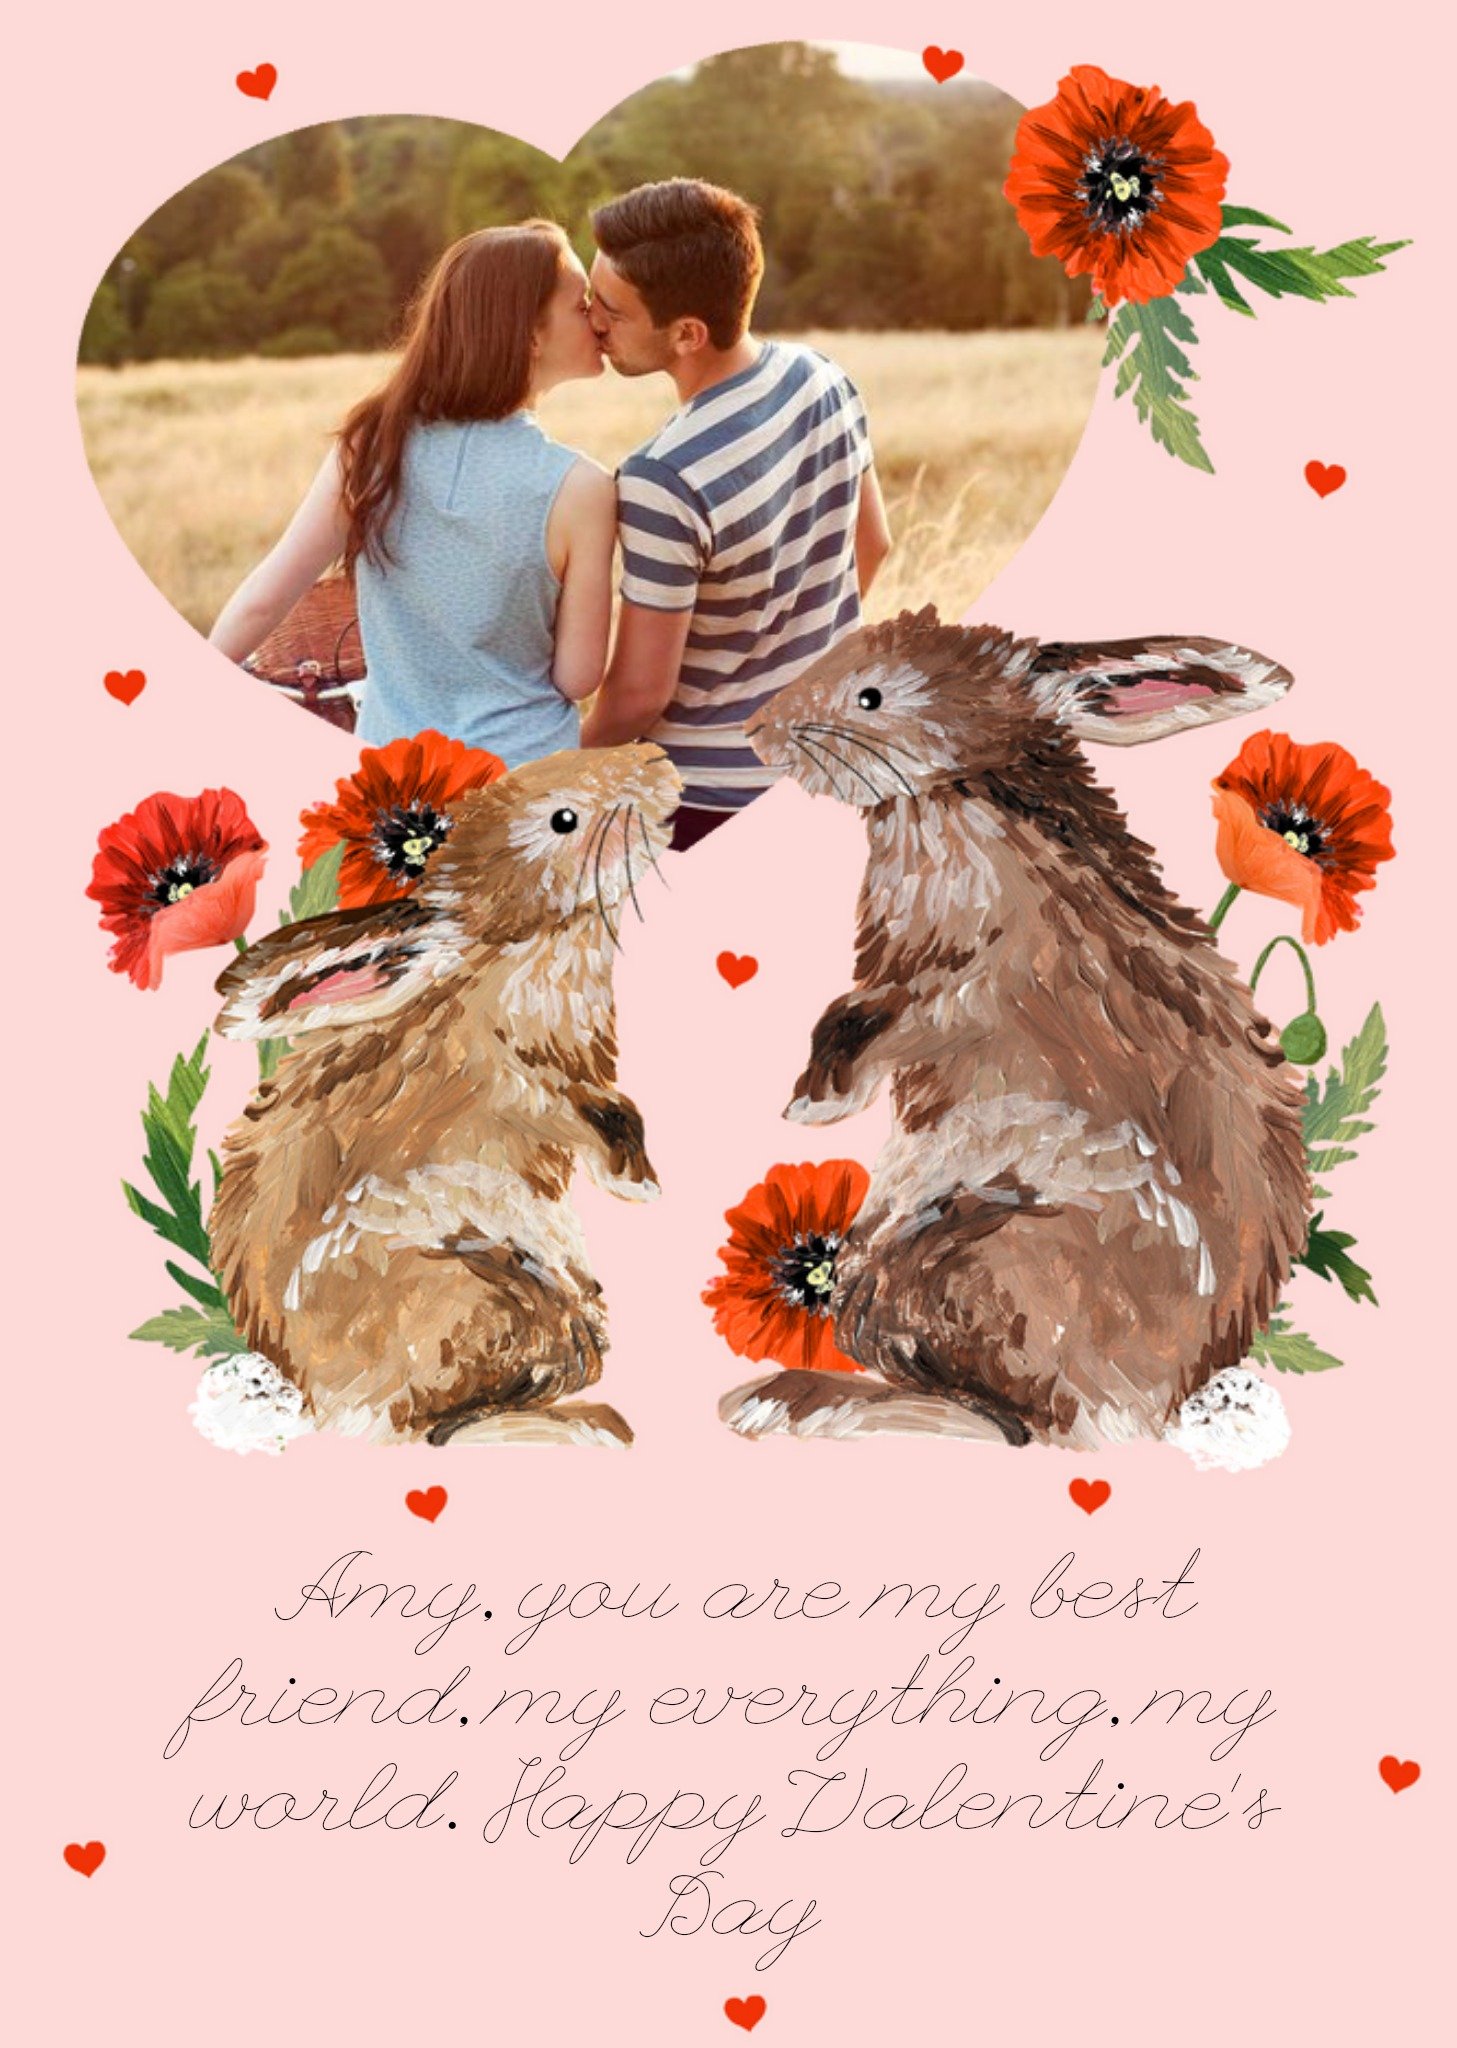 Moonpig Illustration Of Two Rabbits Surrounded By Flowers Valentine's Day Photo Upload Card Ecard